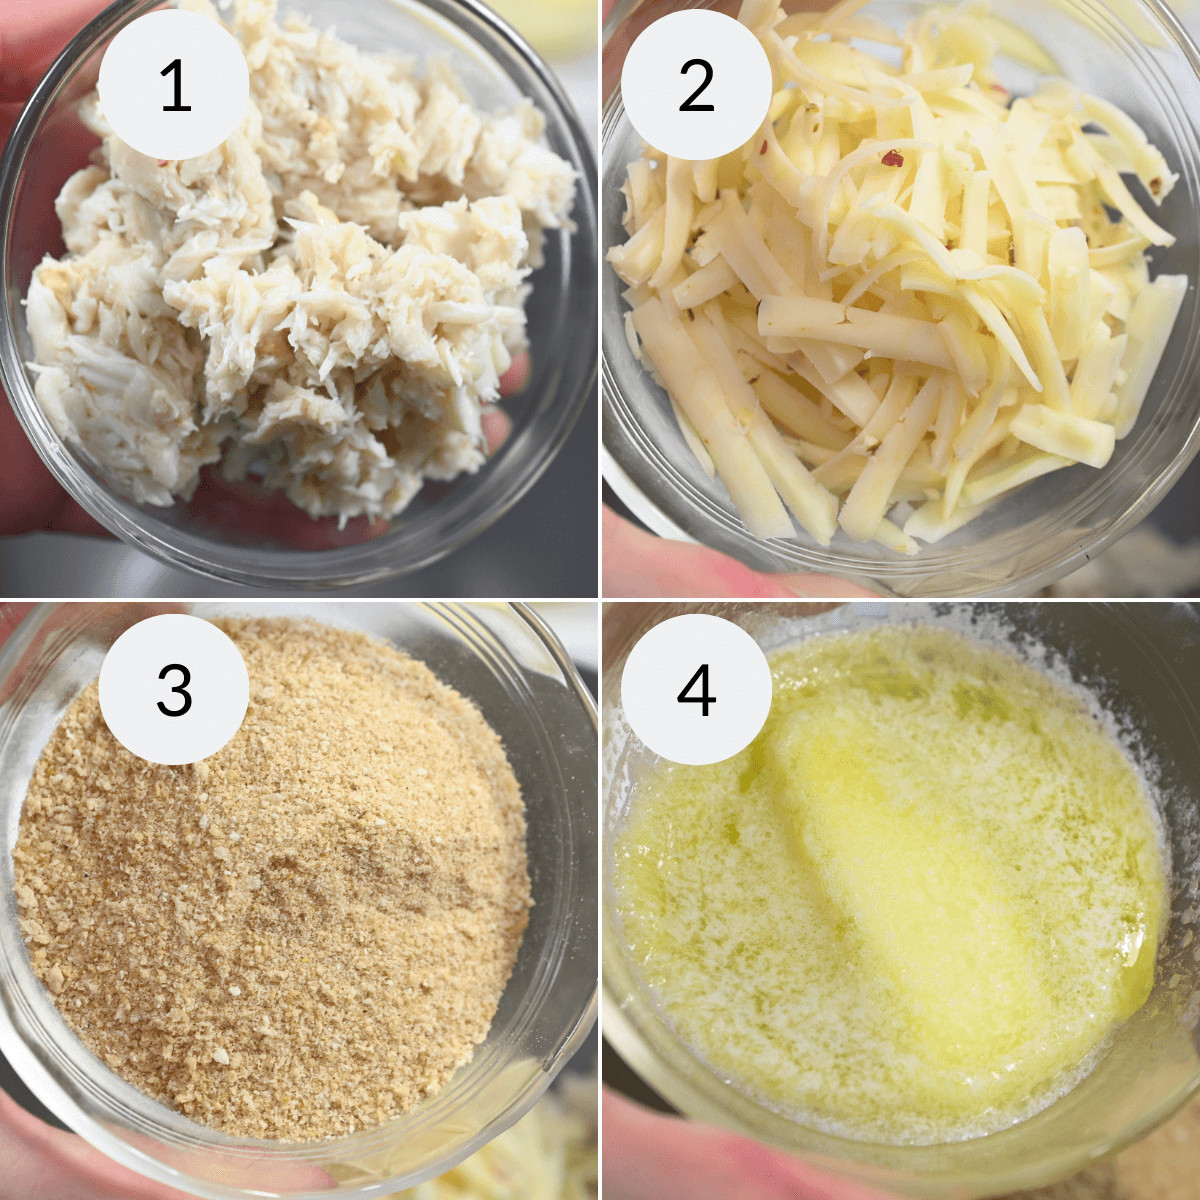 Four-step cooking process showcasing different ingredients: shredded crabmeat, grated cheese, breadcrumbs, and melted butter.